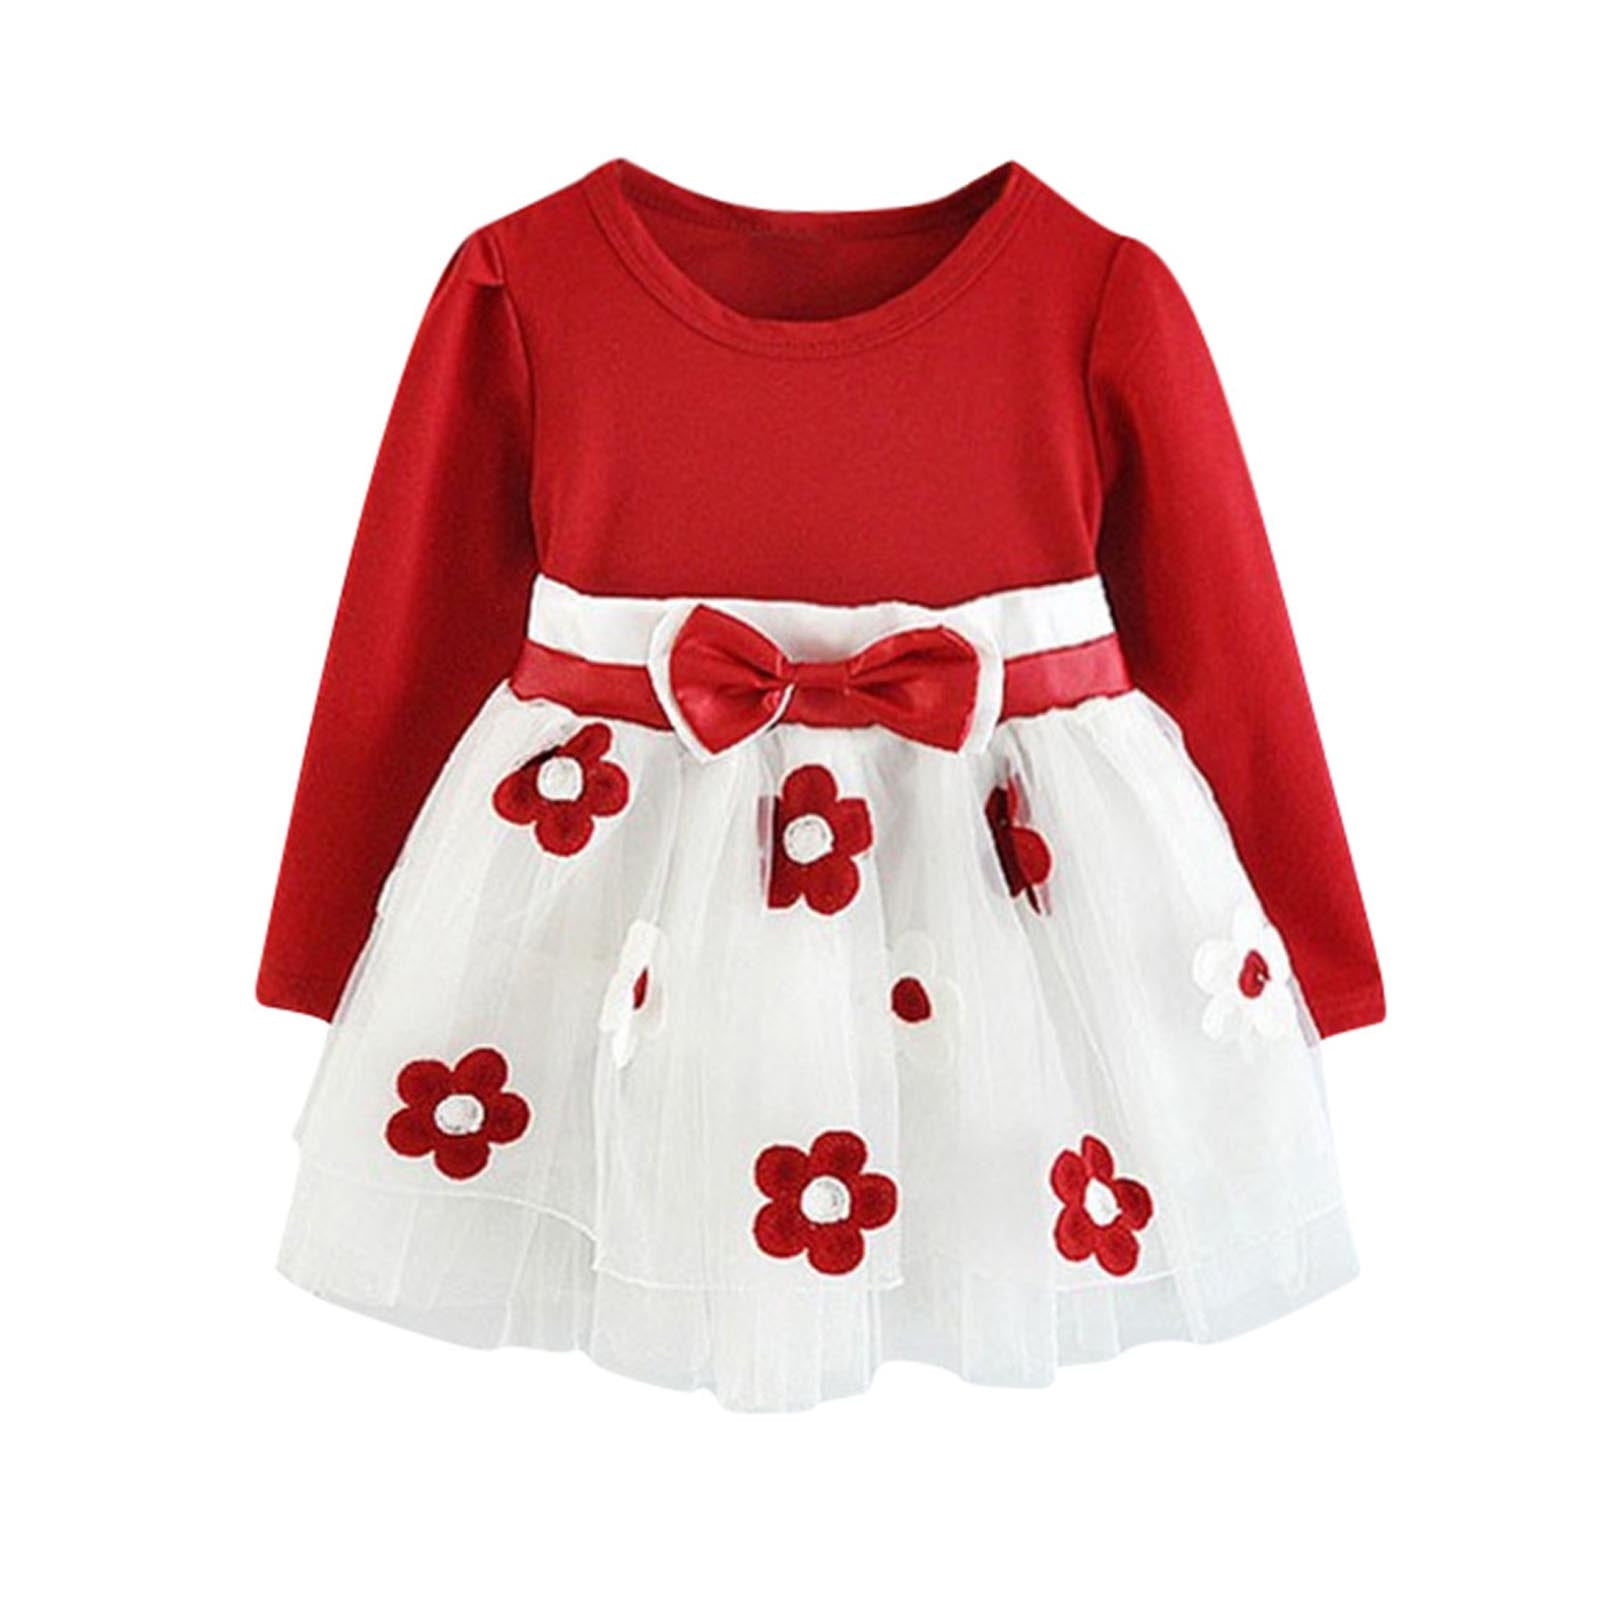 XMMSWDLA Toddler Girl Clothes Sales Clearance Kids Baby Girls Long ...